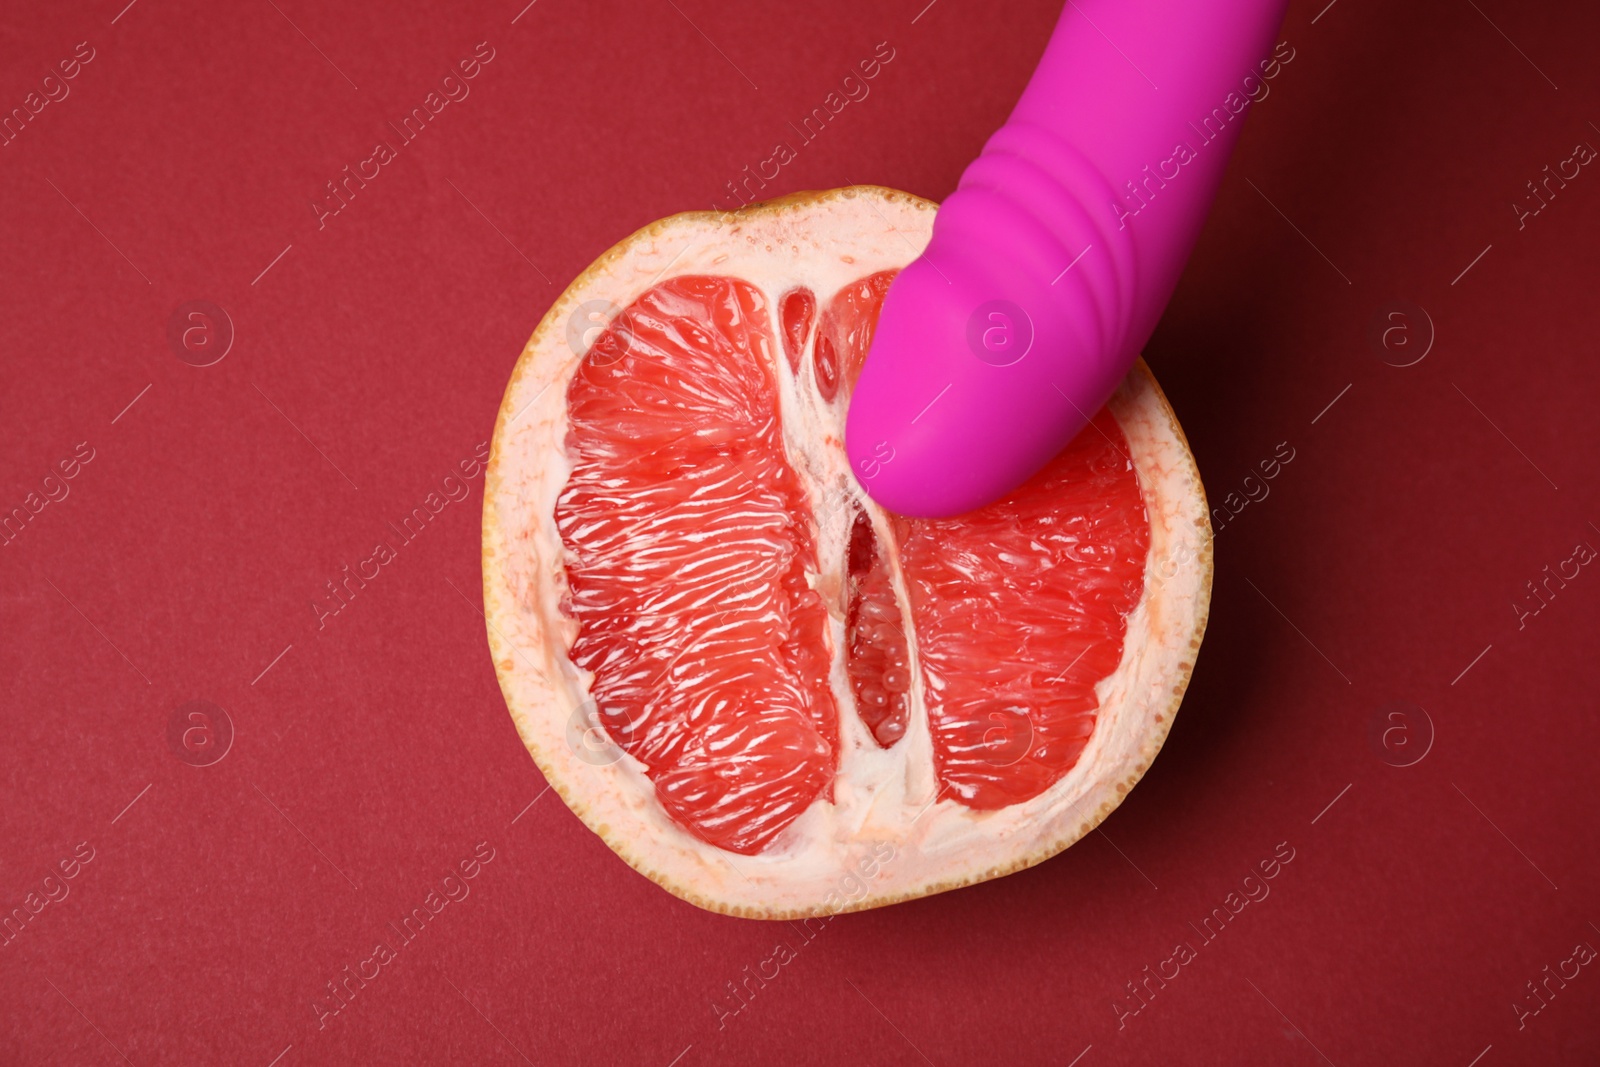 Photo of Half of grapefruit and purple vibrator on red background, flat lay. Sex concept